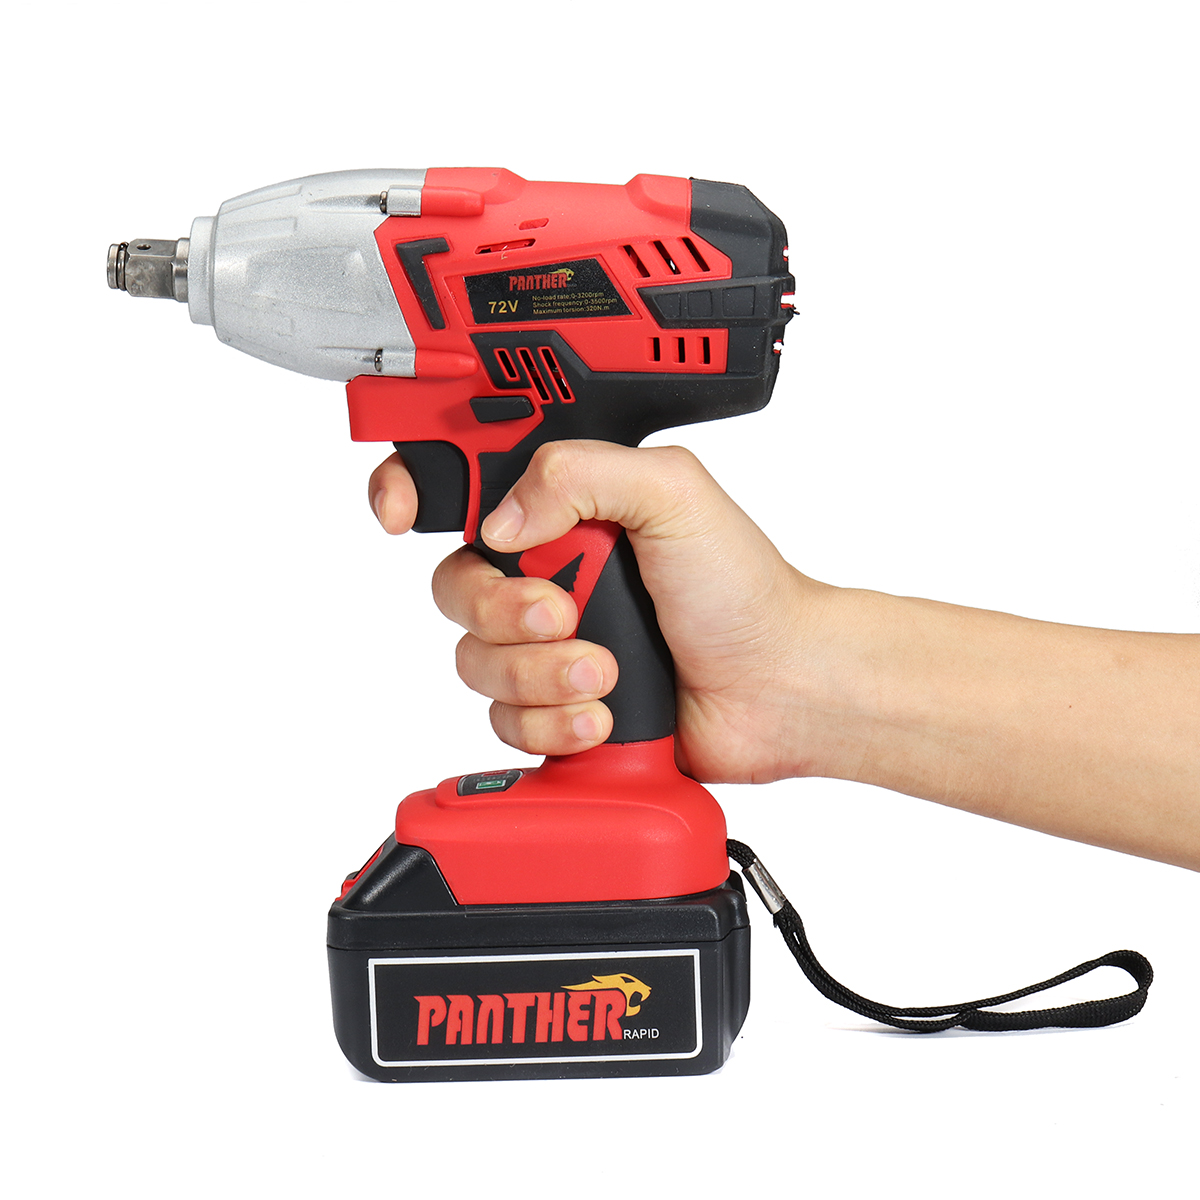 8800mah-Cordless-Electric-Impact-Wrench-LED-Light-320Nm-Torque-Impact-Wrench-Li-Ion-Battery-1402464-6